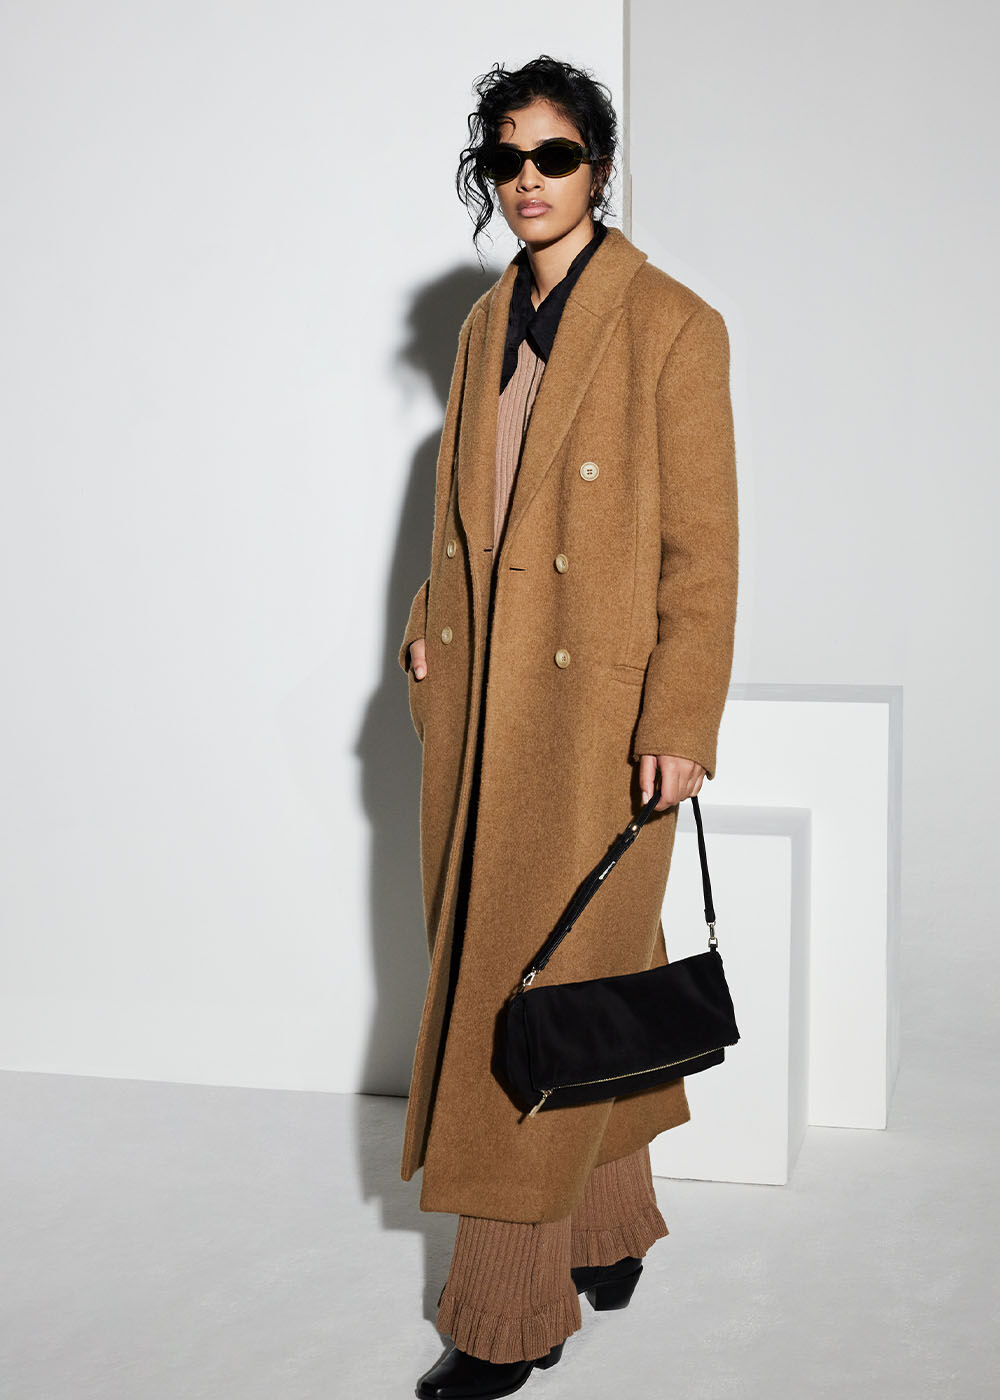 Camel Textured Wool Blend Coat | WHISTLES |